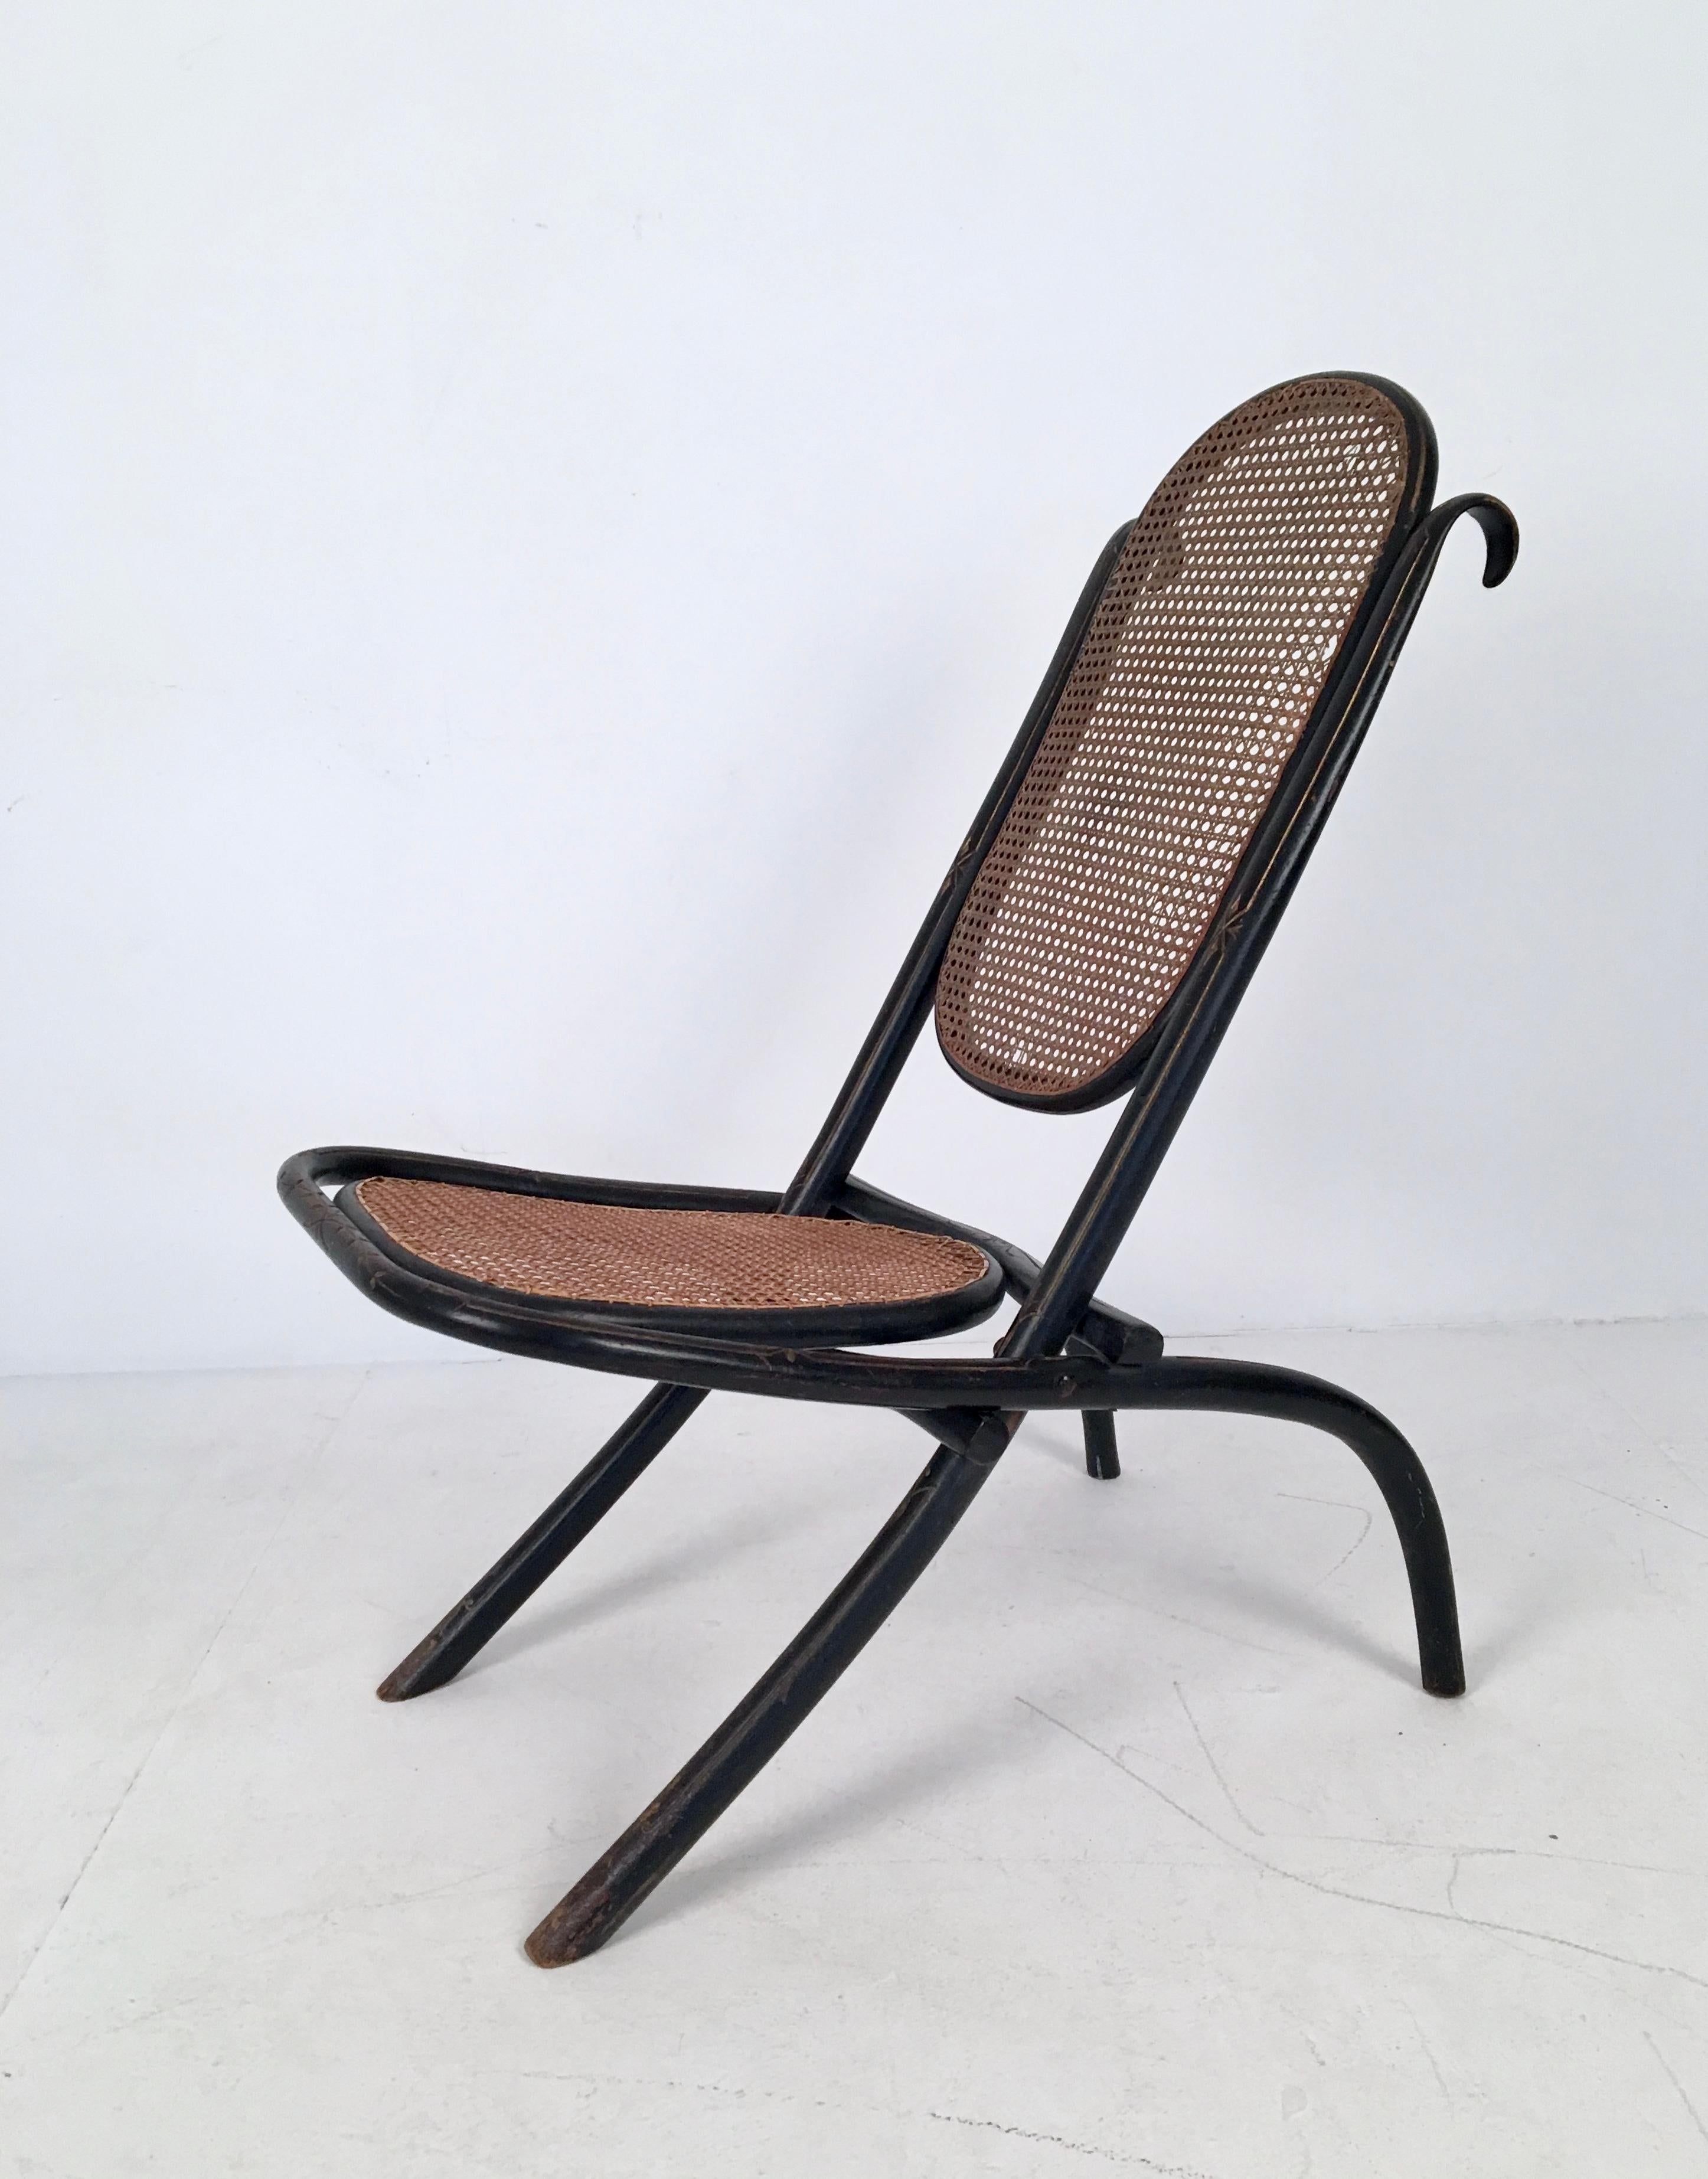 Rare folding cane chair from the aesthetic movement, produced by Thonet, c.1860.

In fair condition, with minor scuffs to the frame and a small areas of loss to the cane.

Dimensions (cm, approx): 
Height: 75 
Width: 45 
Depth: 50.